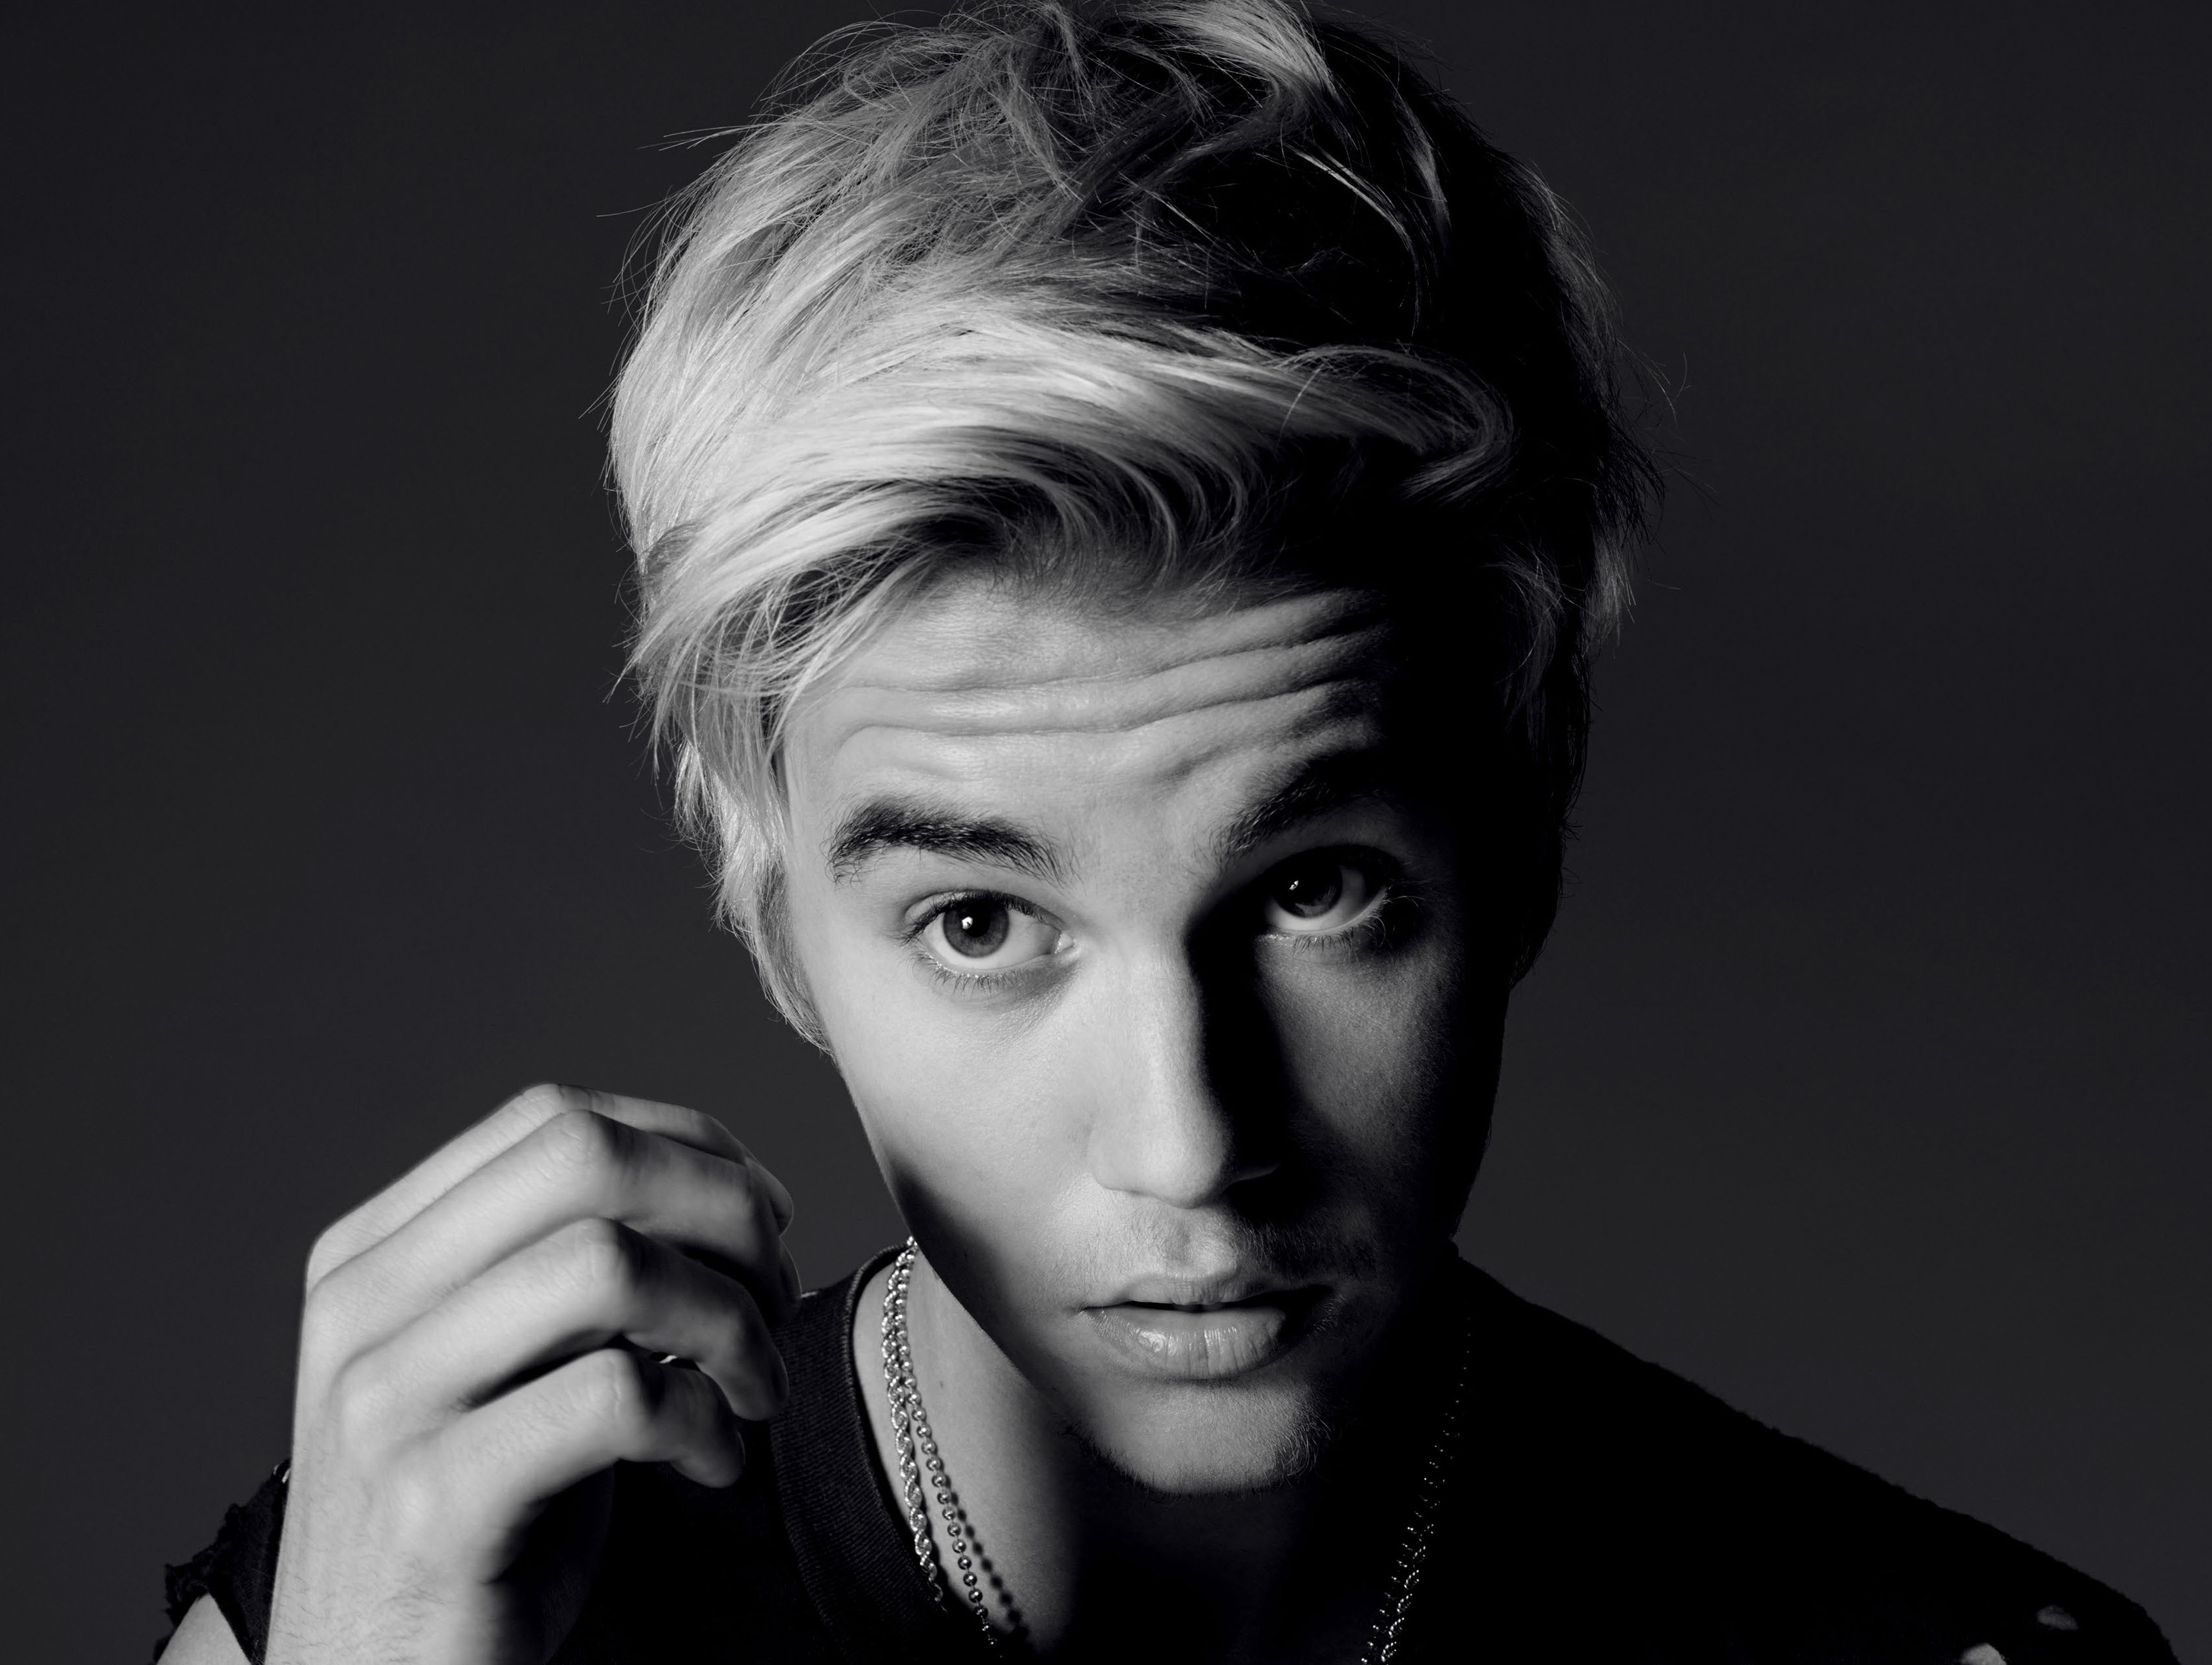 Justin Bieber Wallpaper High Resolution And Quality